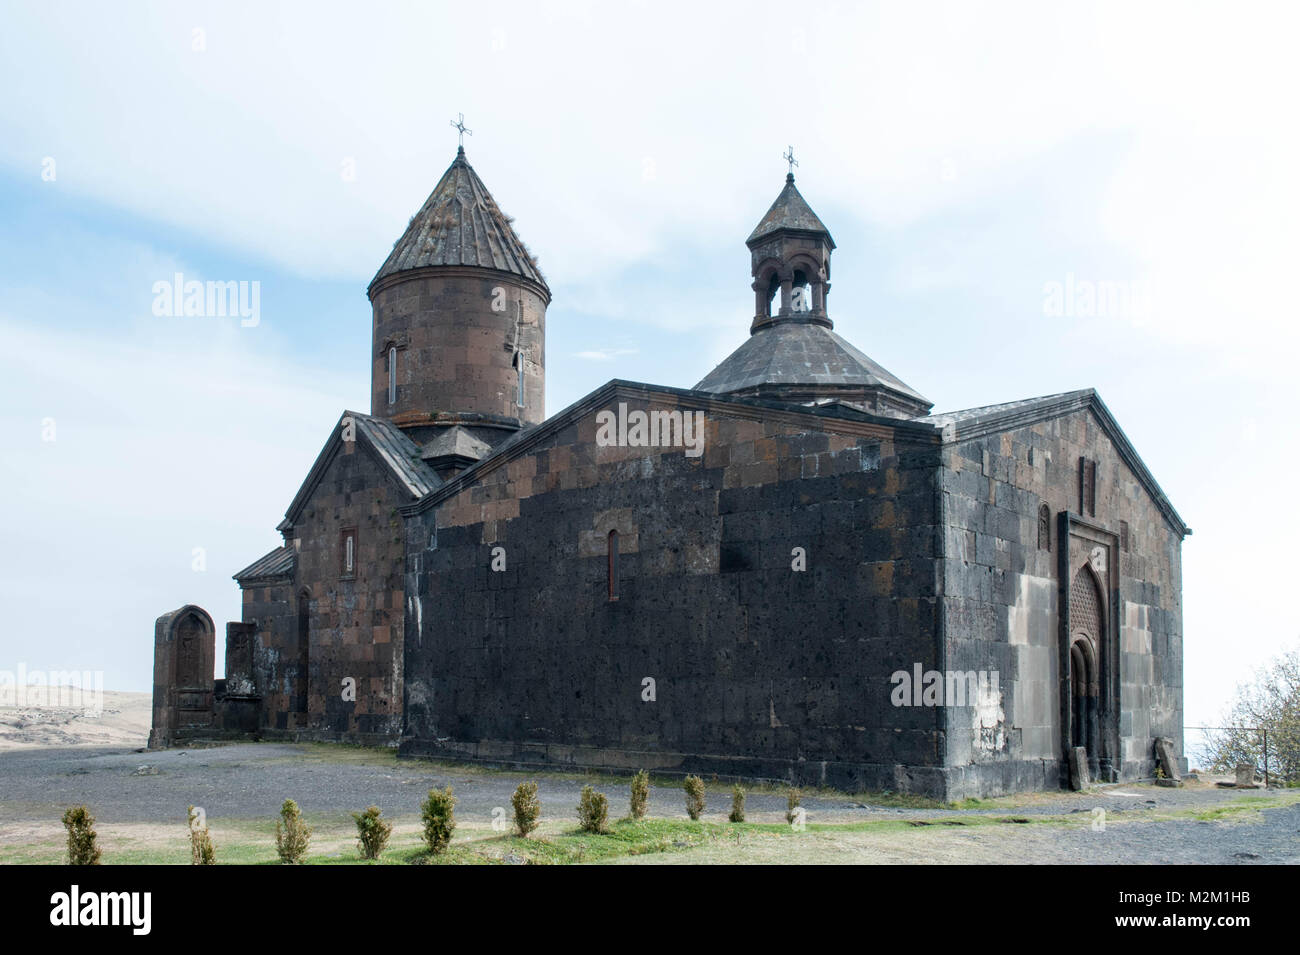 The Saghmosavank s a 13th-century Armenian monastic complex located in the village of Saghmosavan in the Aragatsotn Province of Armenia. Like the Hovh Stock Photo